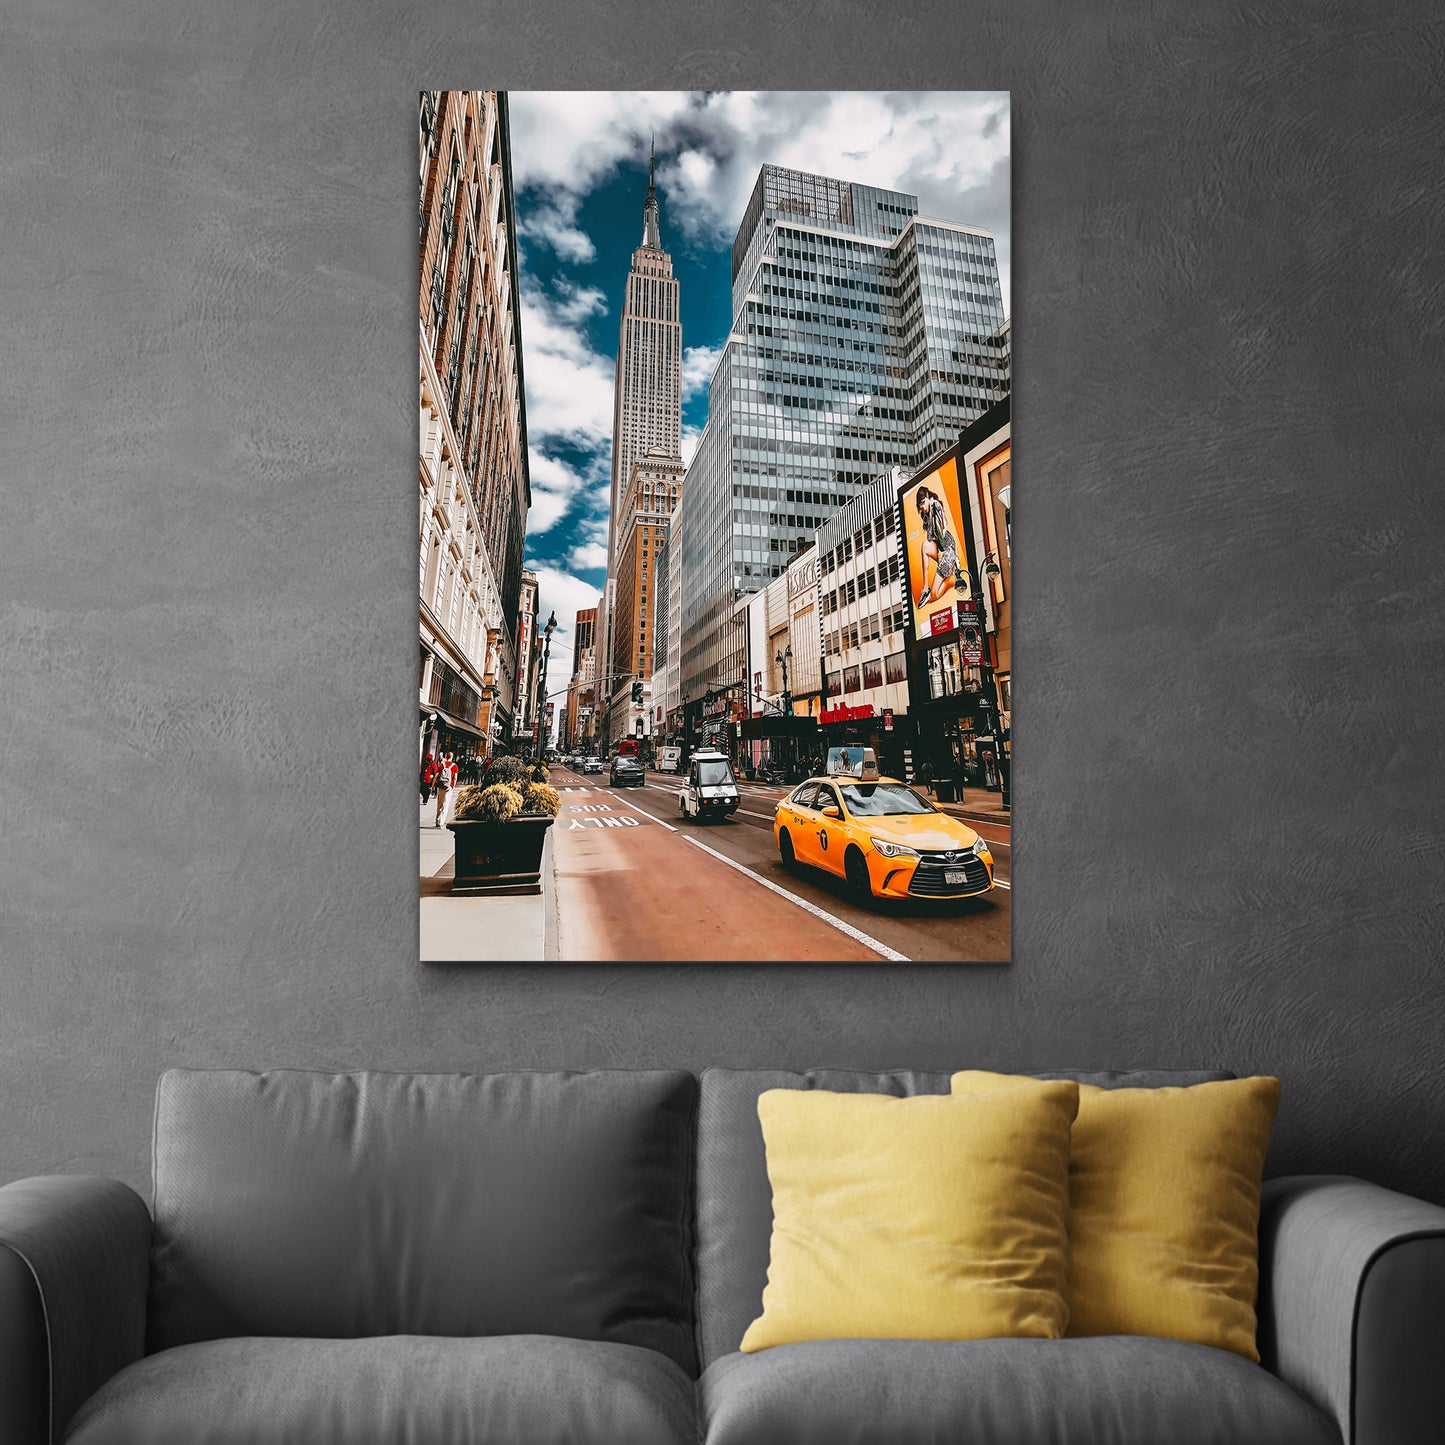 Along The Street Of New York City Canvas Wall Art Style 2 - Image by Tailored Canvases